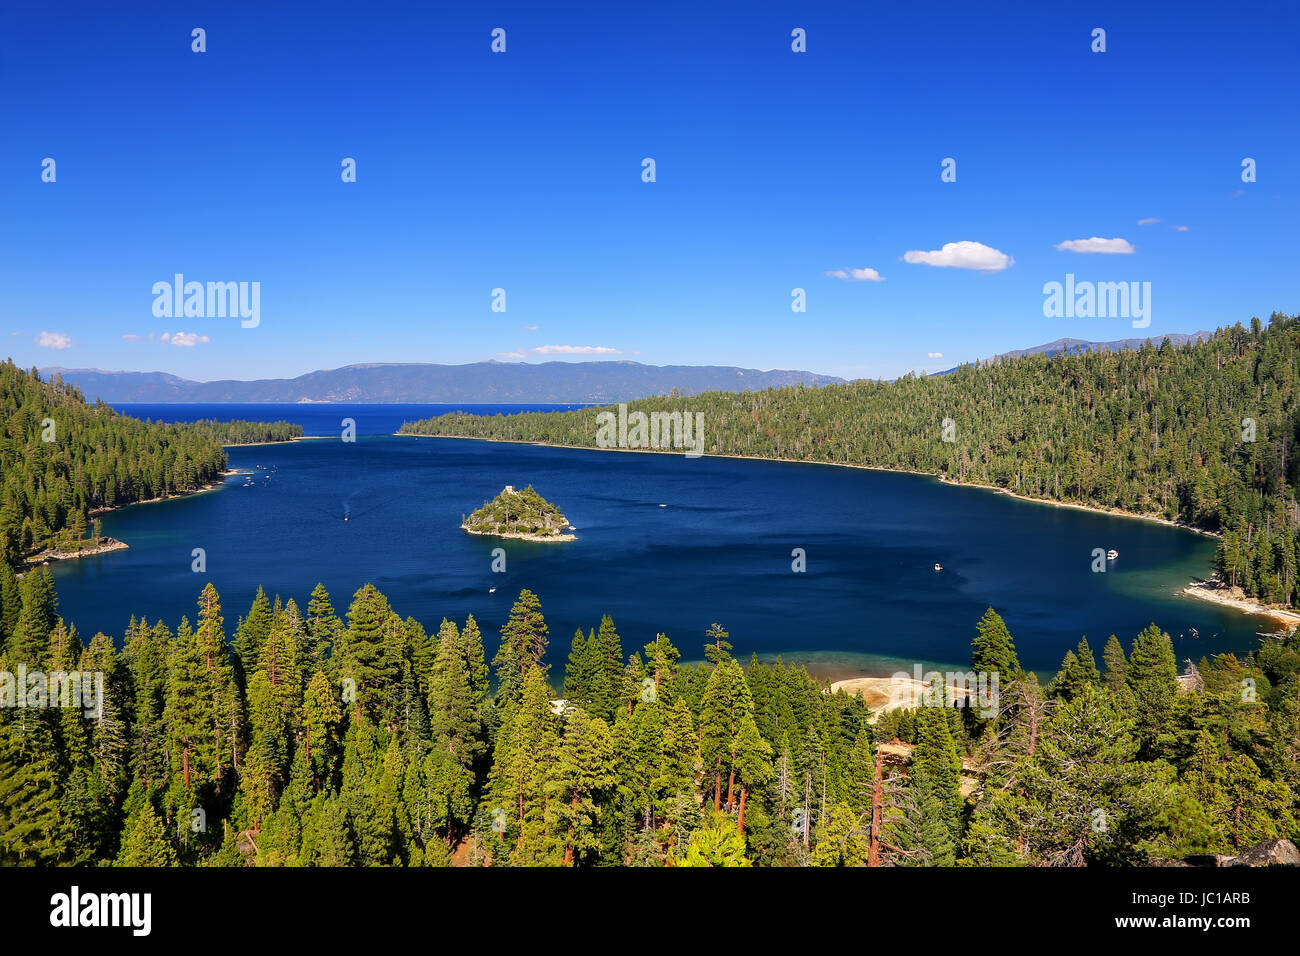 Emerald Bay at Lake Tahoe with Fannette Island, California, USA. Lake Tahoe is the largest alpine lake in North America Stock Photo